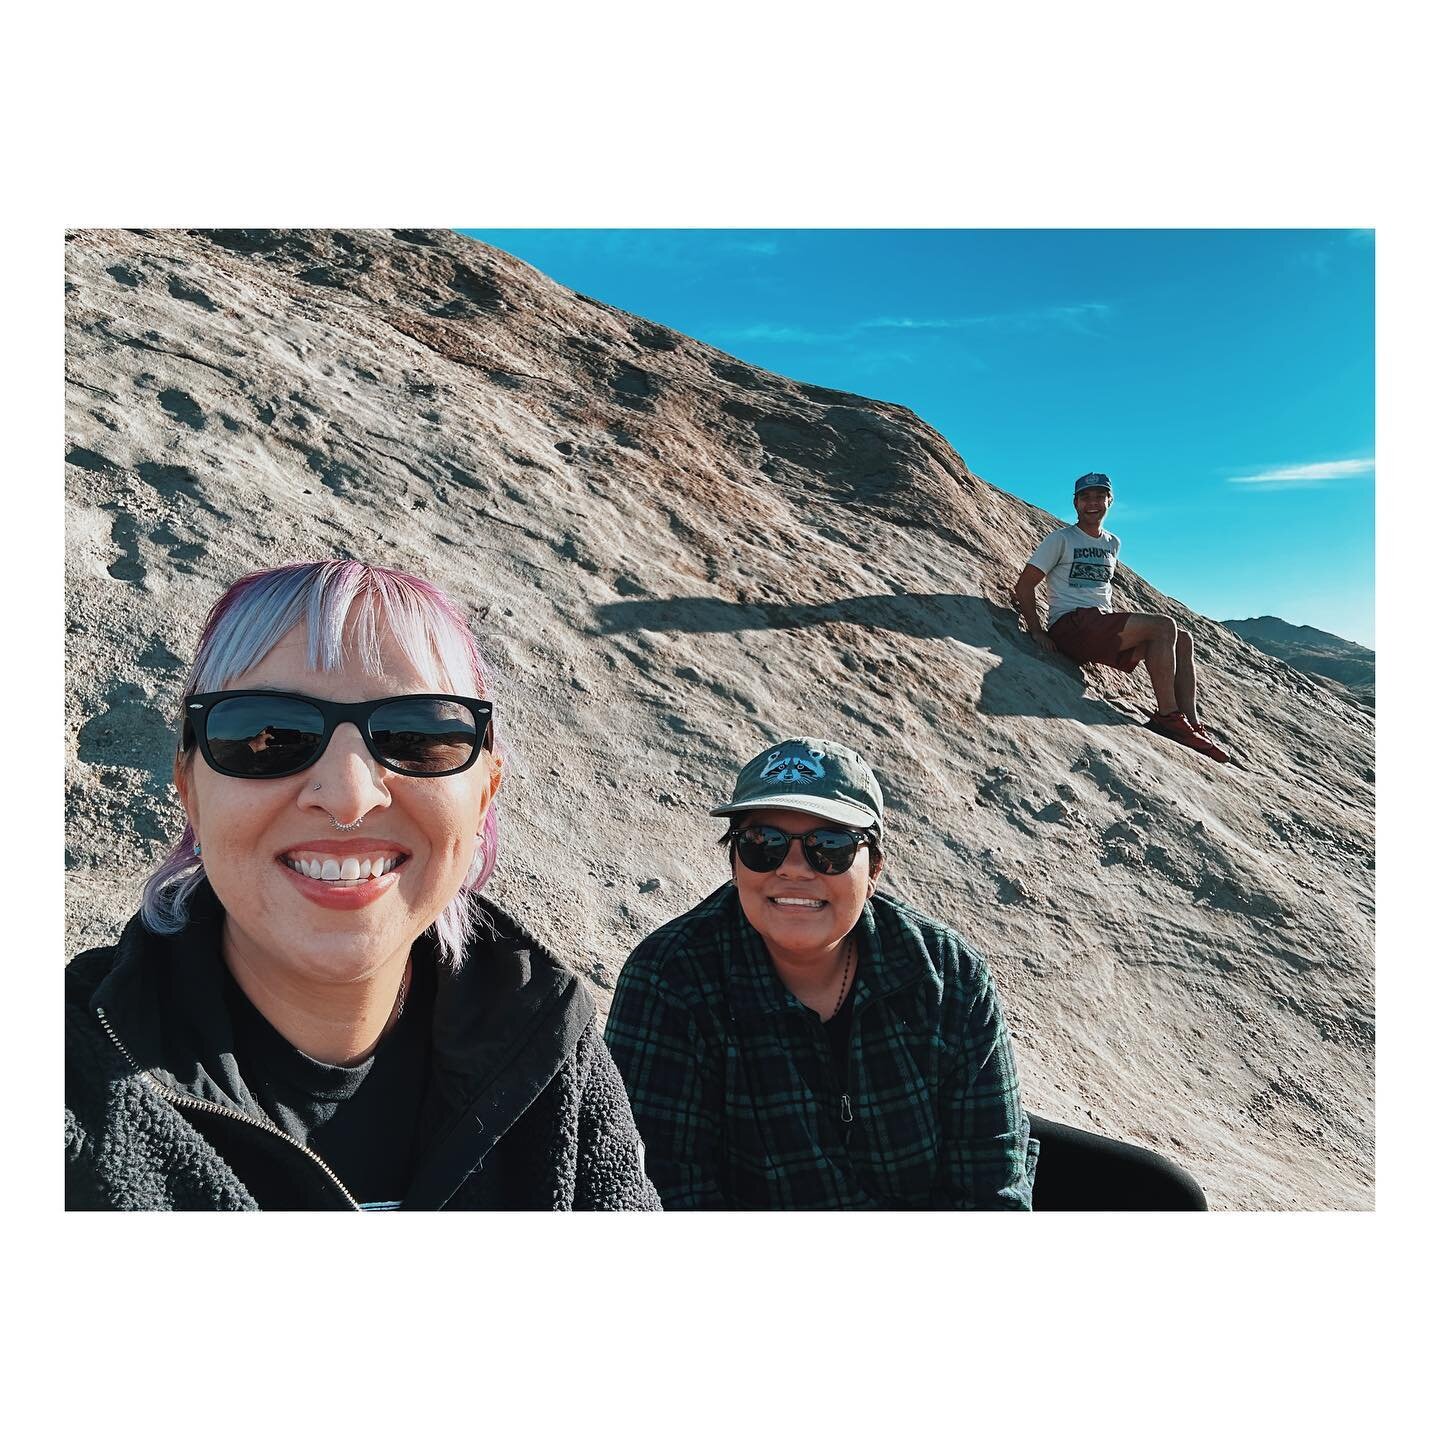 Dr. Vendrasco&rsquo;s 1F Day Trip: Stop 1 - Vasquez rocks. Had fun scrambling up a ~ 30 - 40 degree dip, strike ~ 30 degrees NE. 🤓
.
.
.
.
.
#pccgeology #geology #geologystudents #geologynerds #geologyfieldstudy #vasquezrocks #aguadulce #cageology